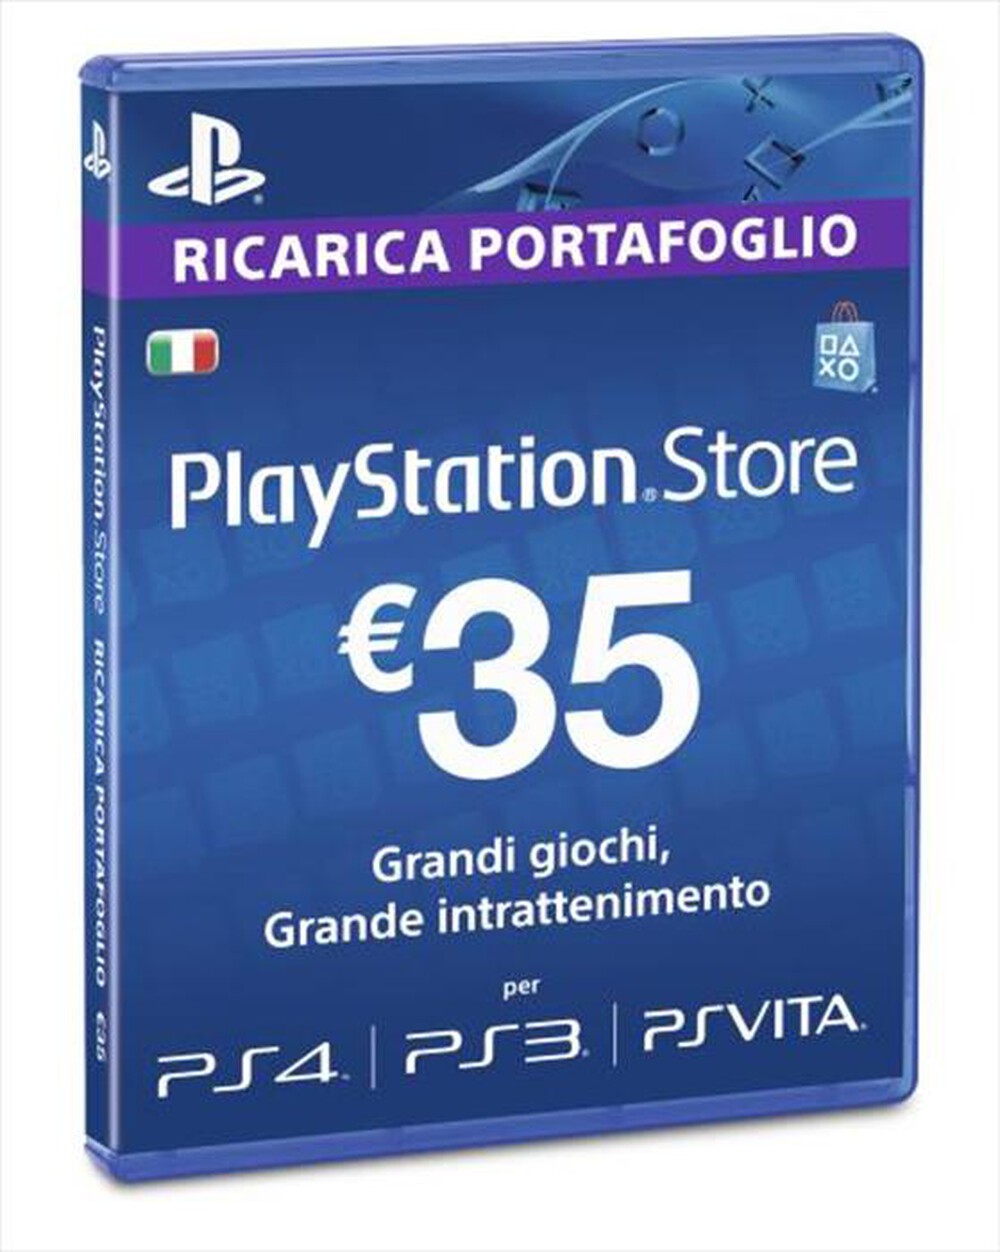 "SONY COMPUTER - PS4 Branded PSN Card 35 Euro"